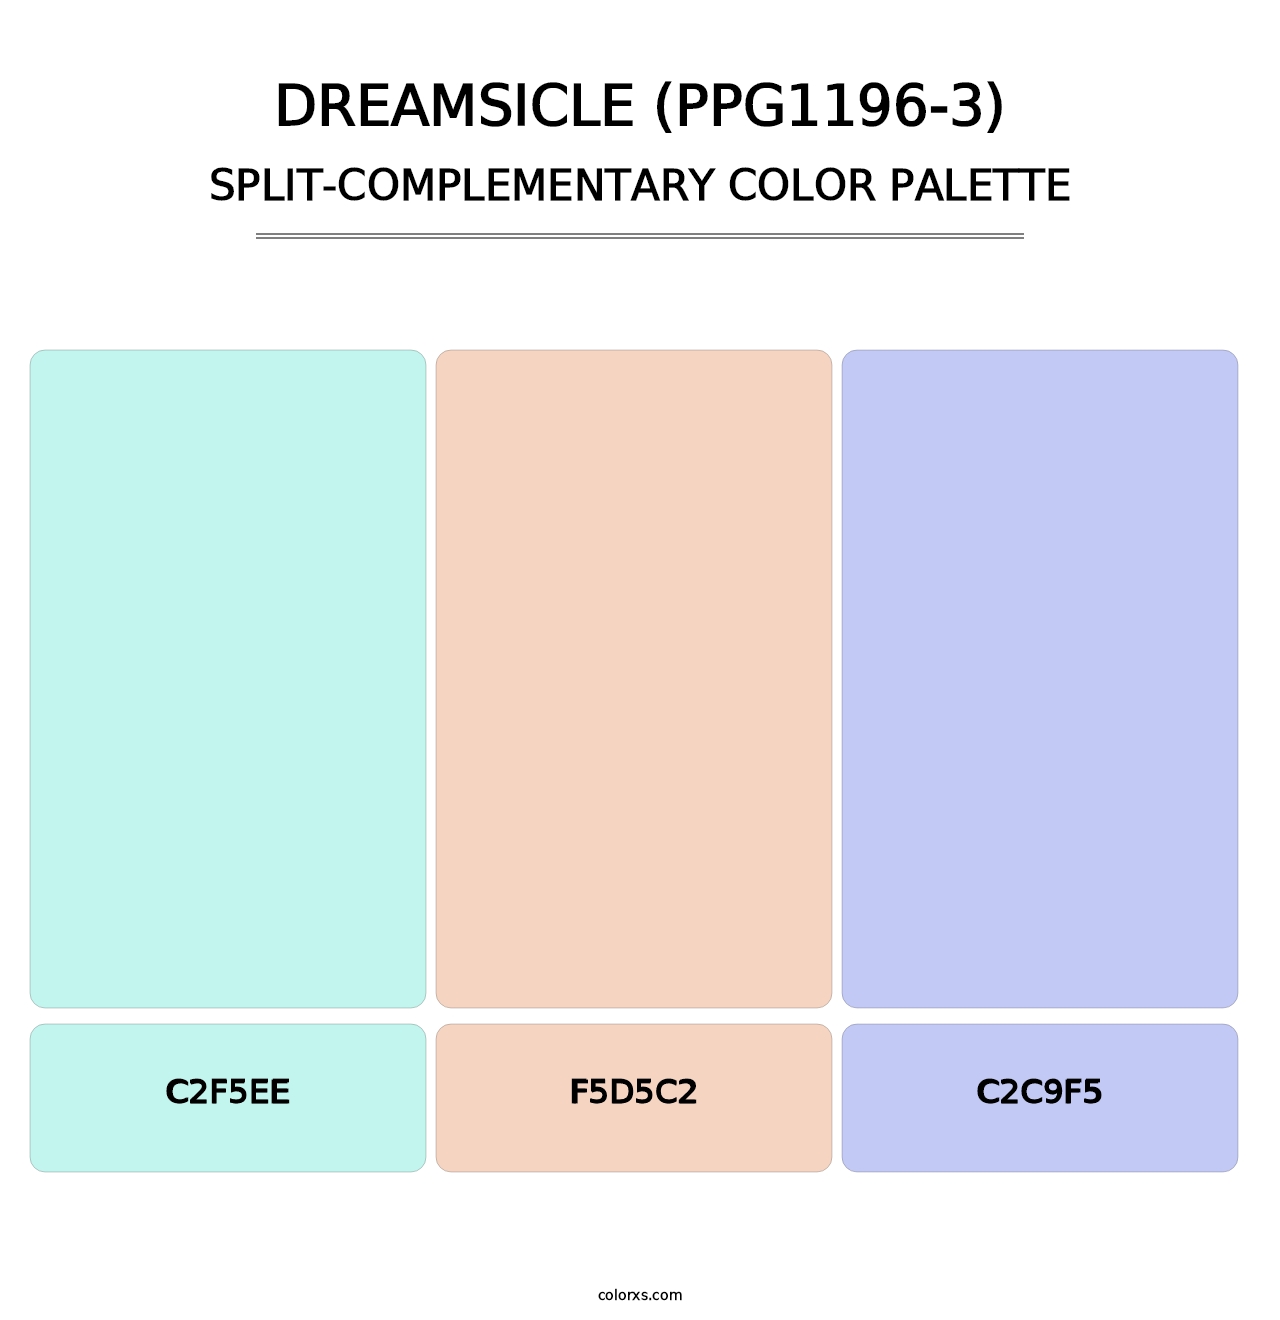 Dreamsicle (PPG1196-3) - Split-Complementary Color Palette